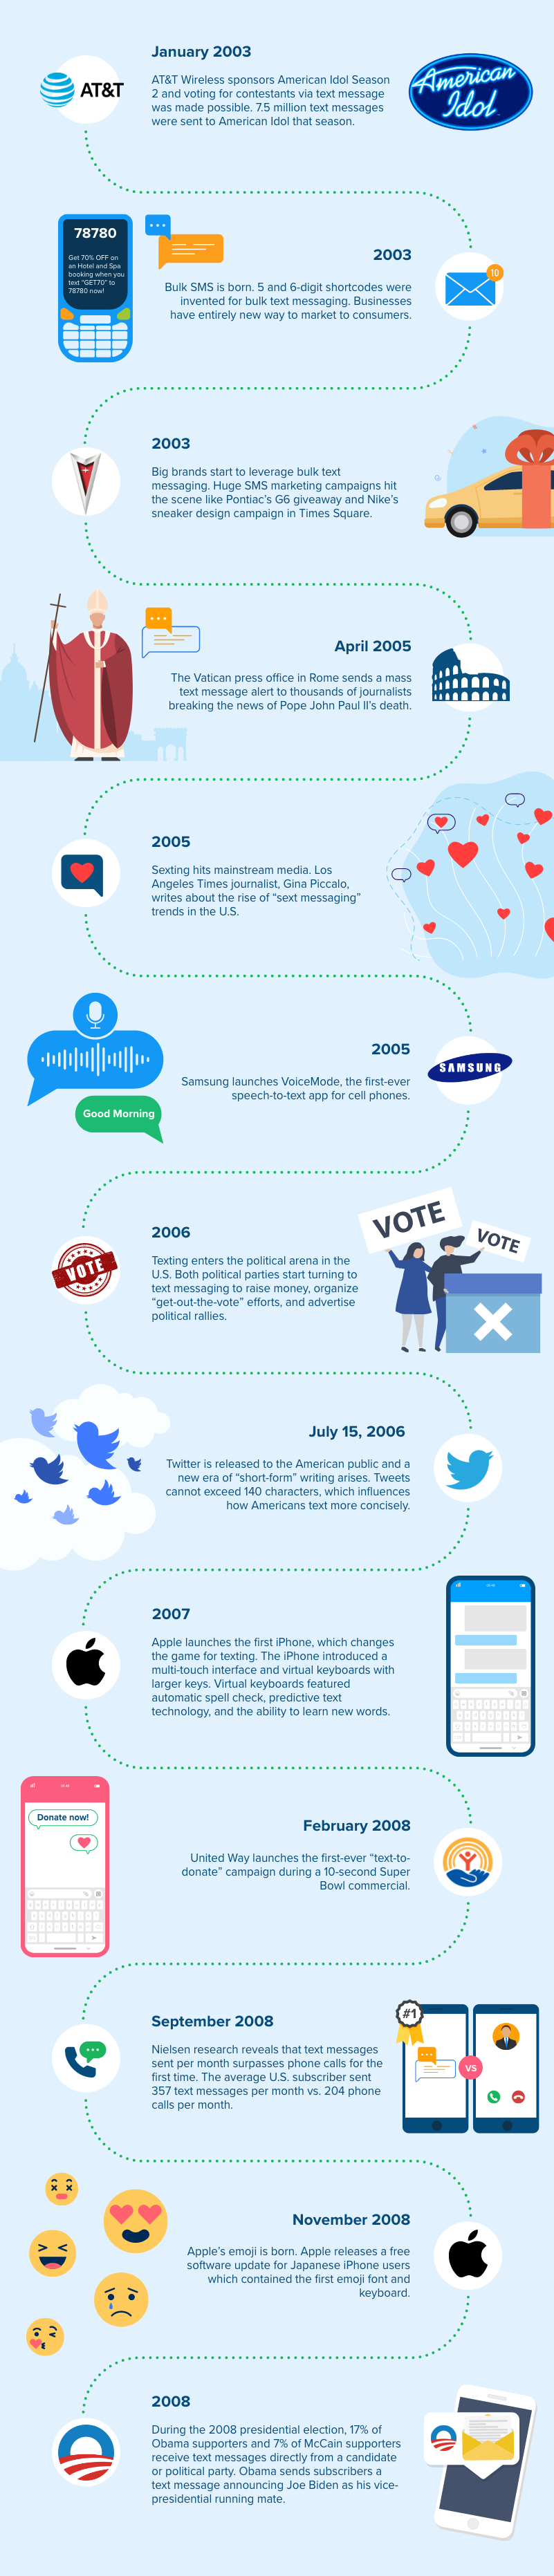 a timeline infographic showing the history of texting from 2003 to 2008